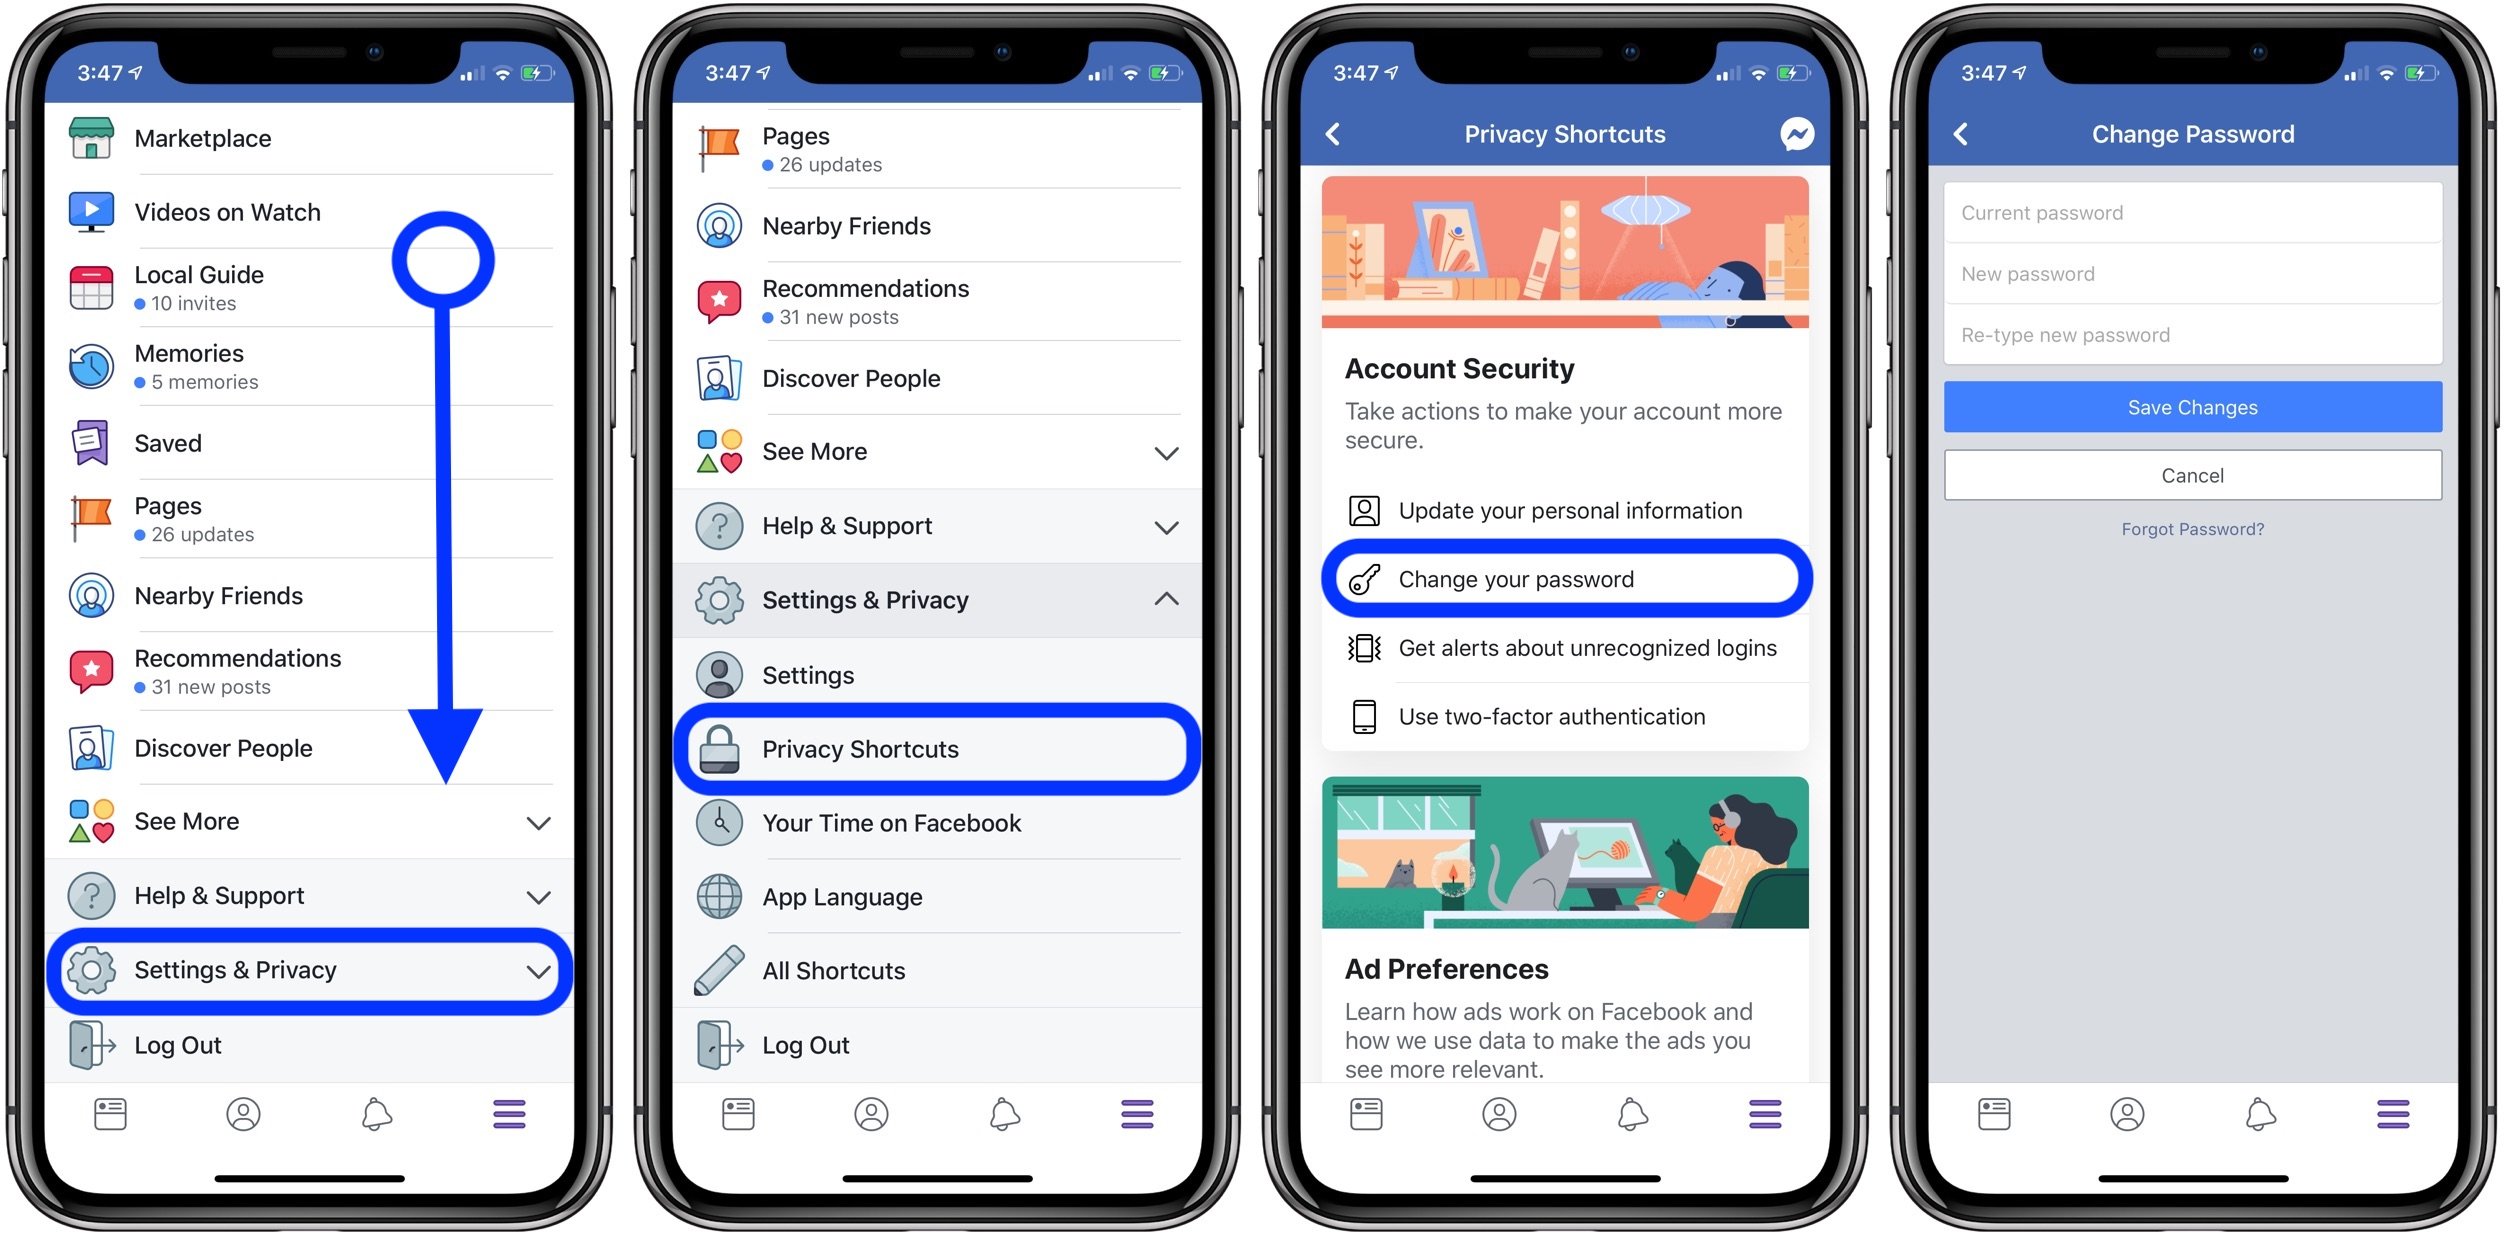 How To Change Your Password On Facebook 2019